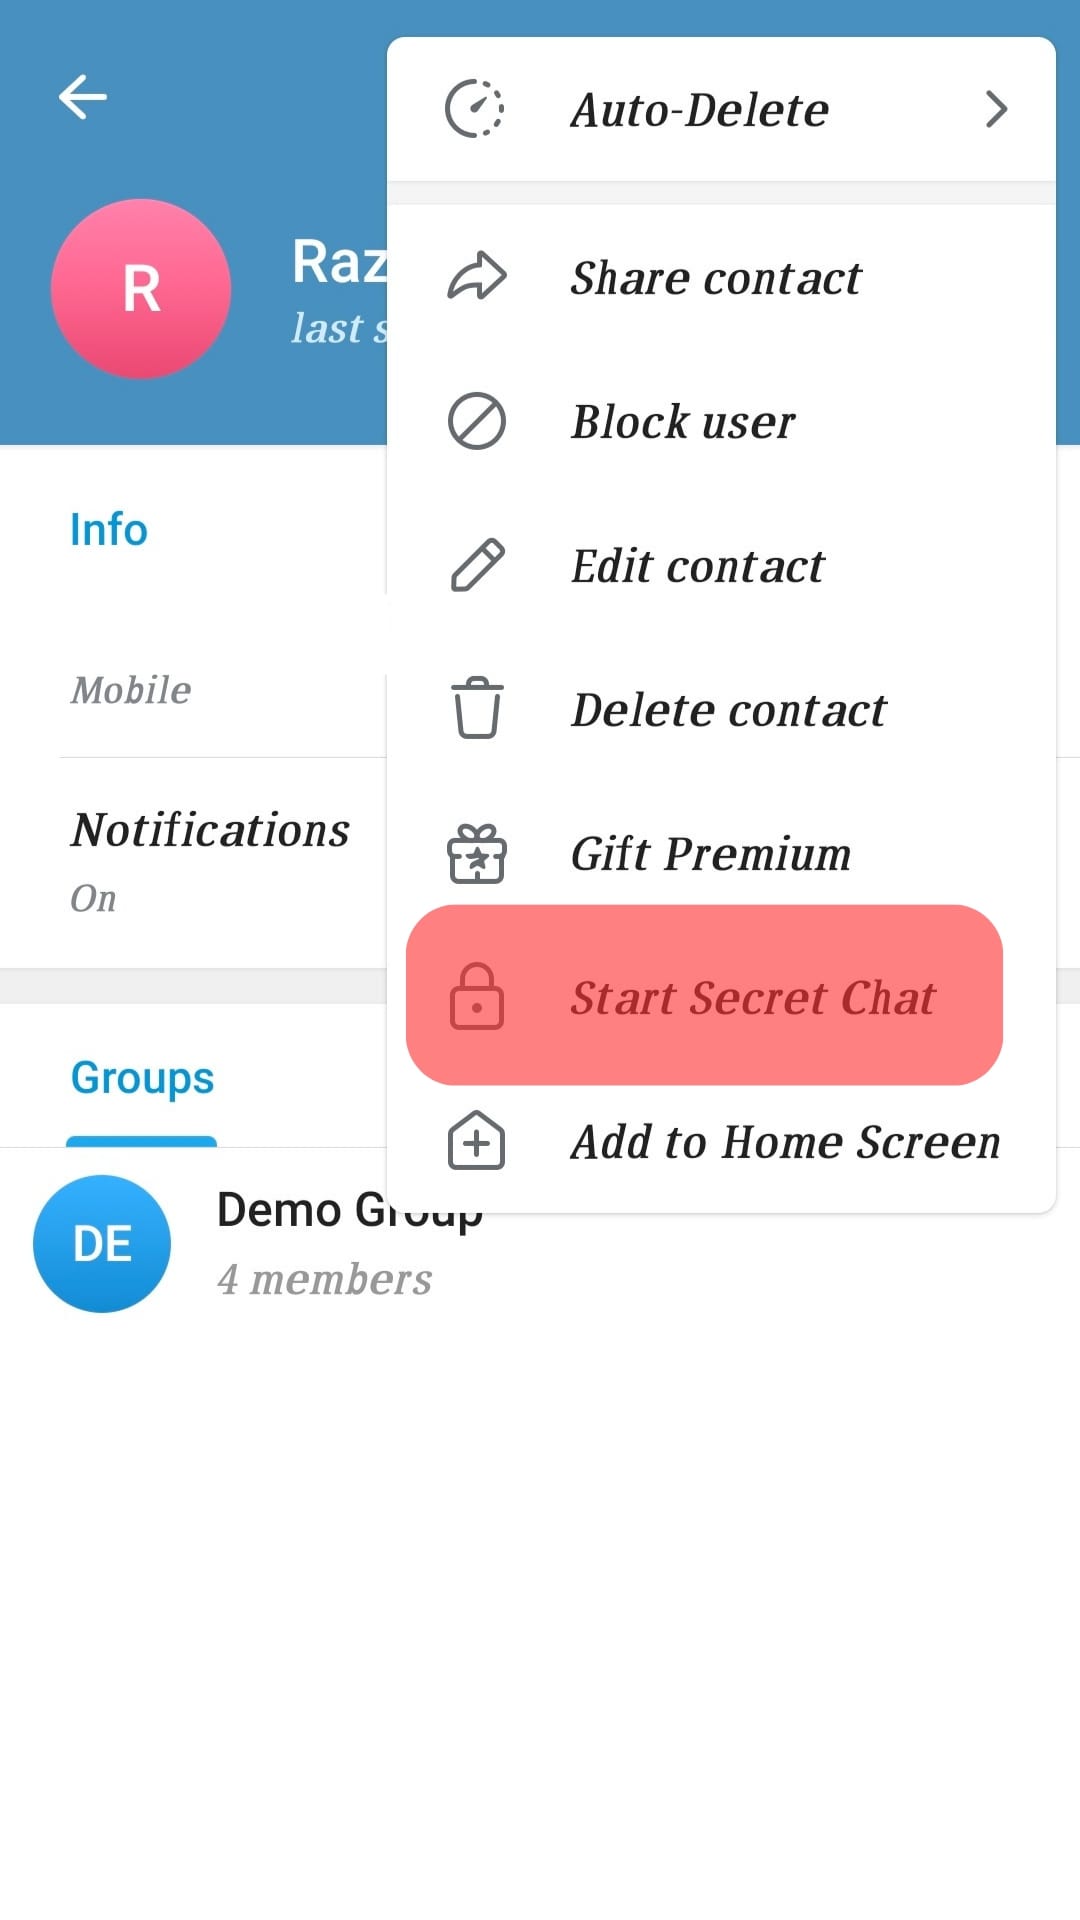 Go To Start Secret Chat And Tap The Option.